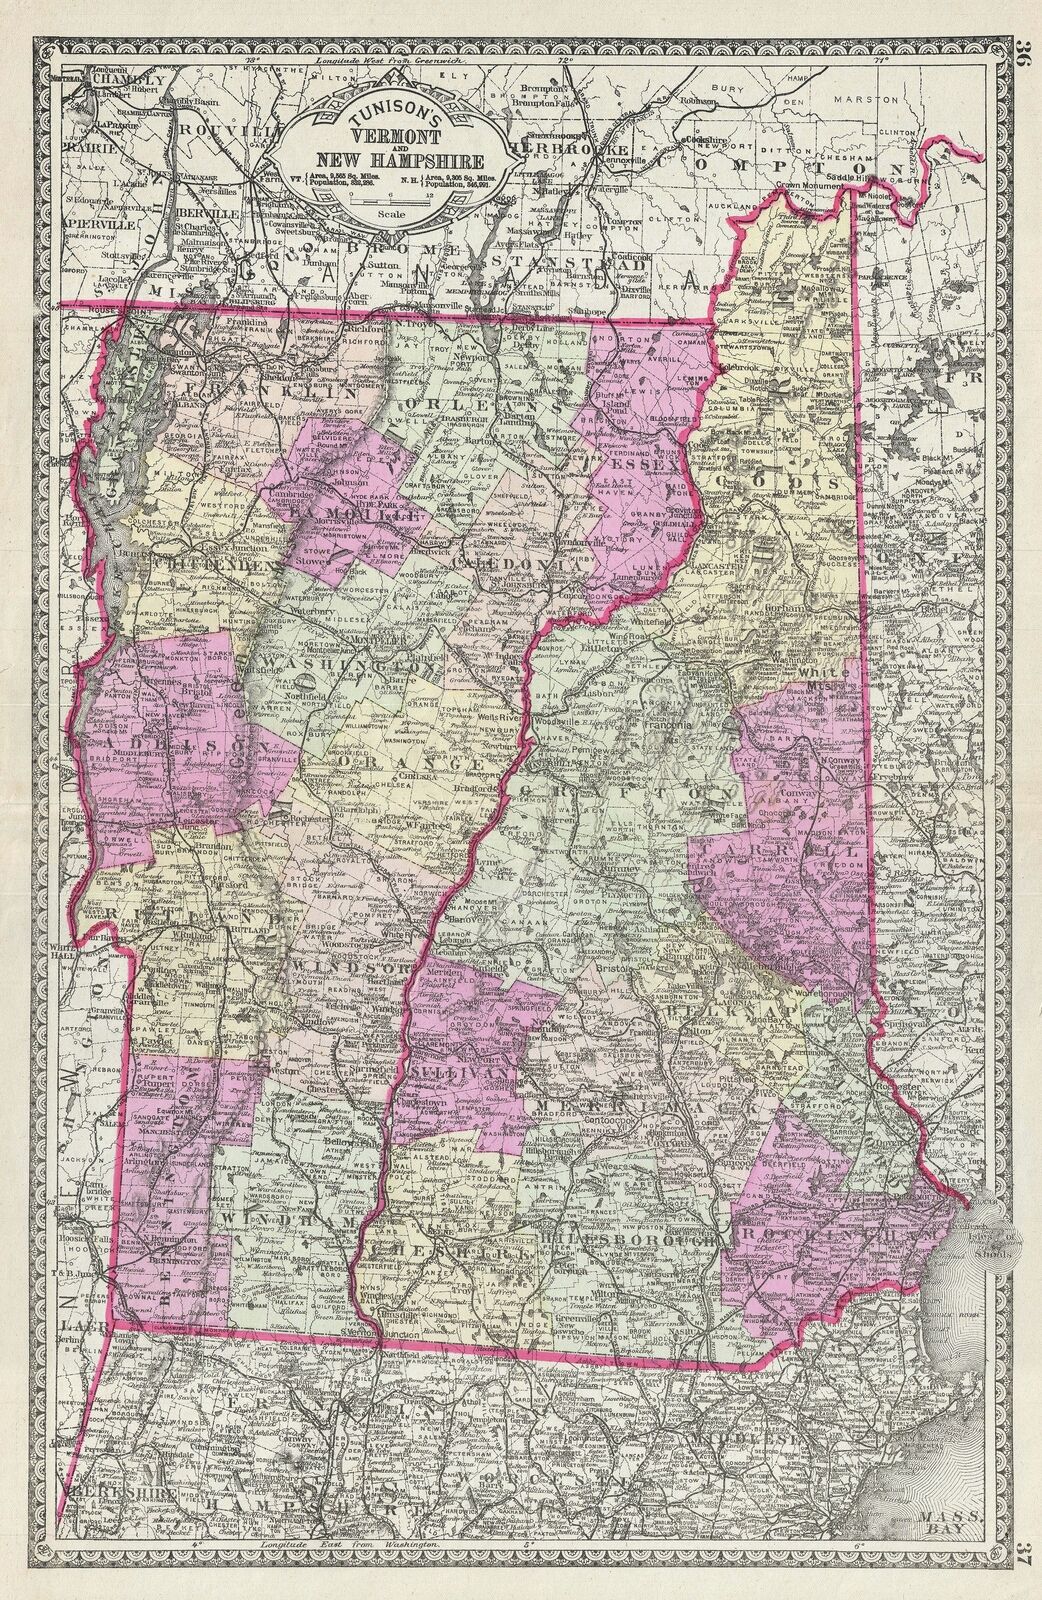 1887 Tunison Map of Vermont and New Hampshire 100% nowy, opłacalny